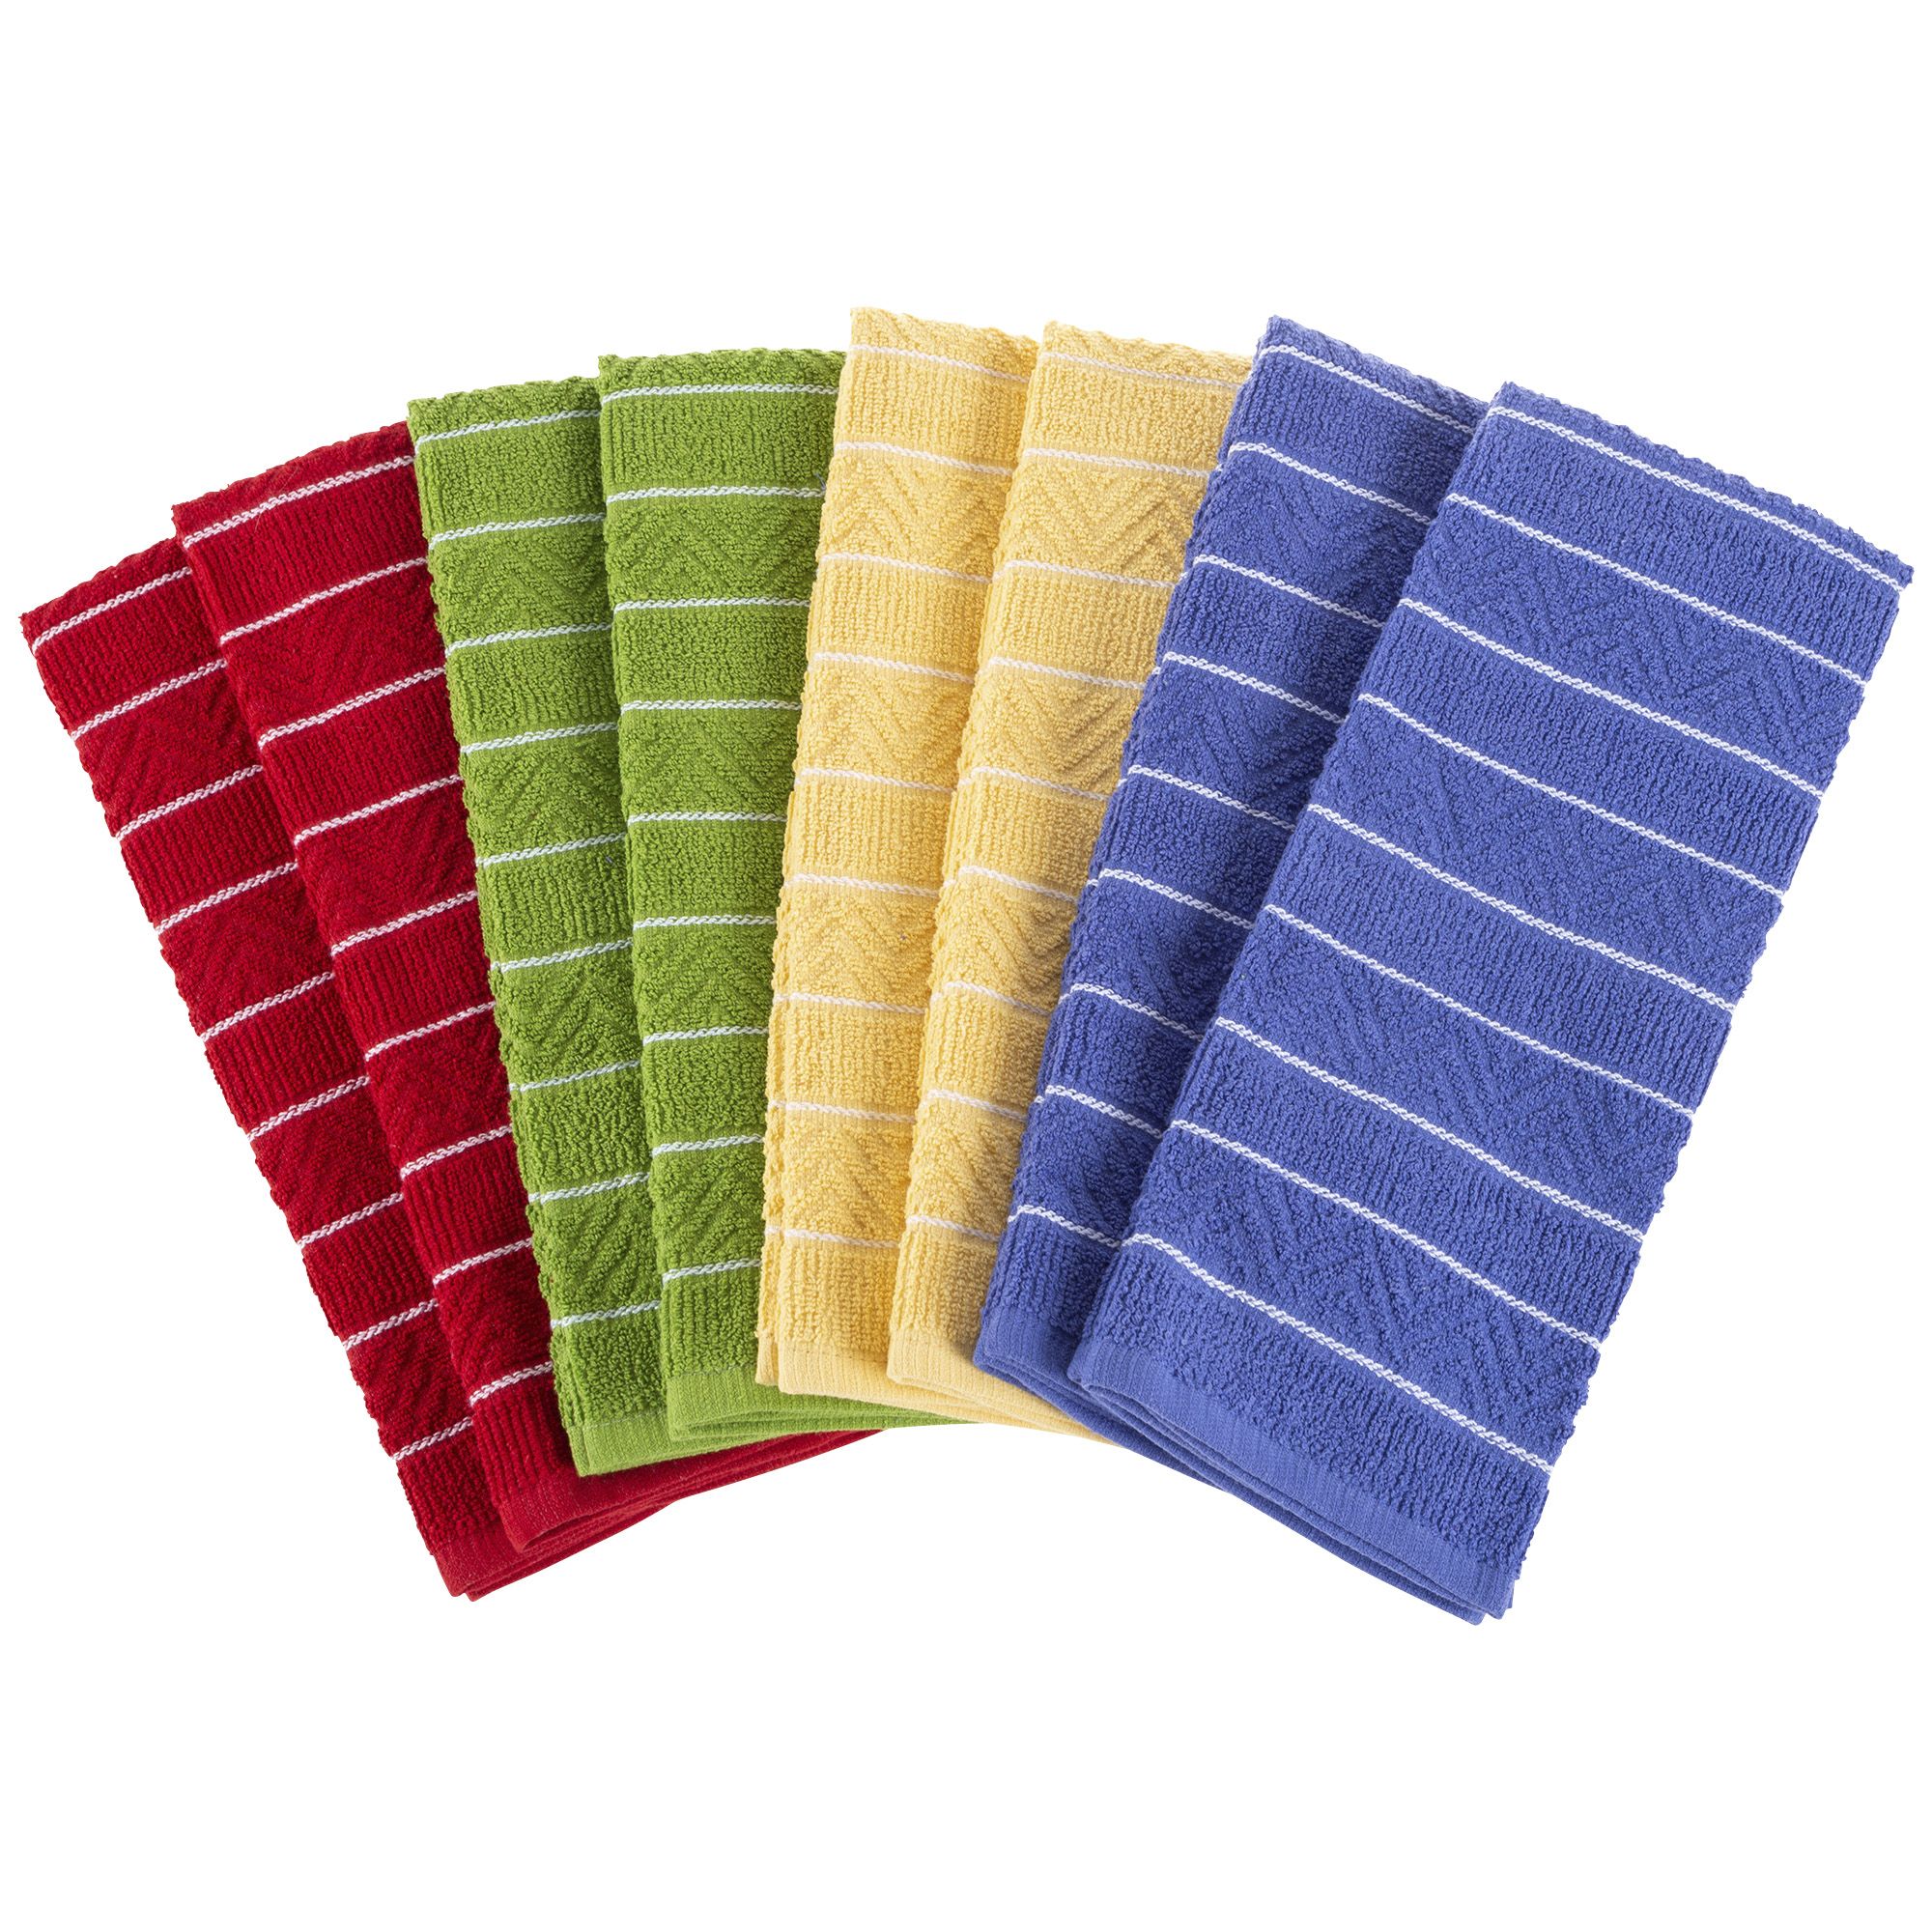 Kitchen Dish Cloth-Set of 16 -12.5x12.5-Absorbent 100% Cotton Wash Cloth-  Chevron Weave Pattern in 4 Colors- Dishcloths by Hastings Home